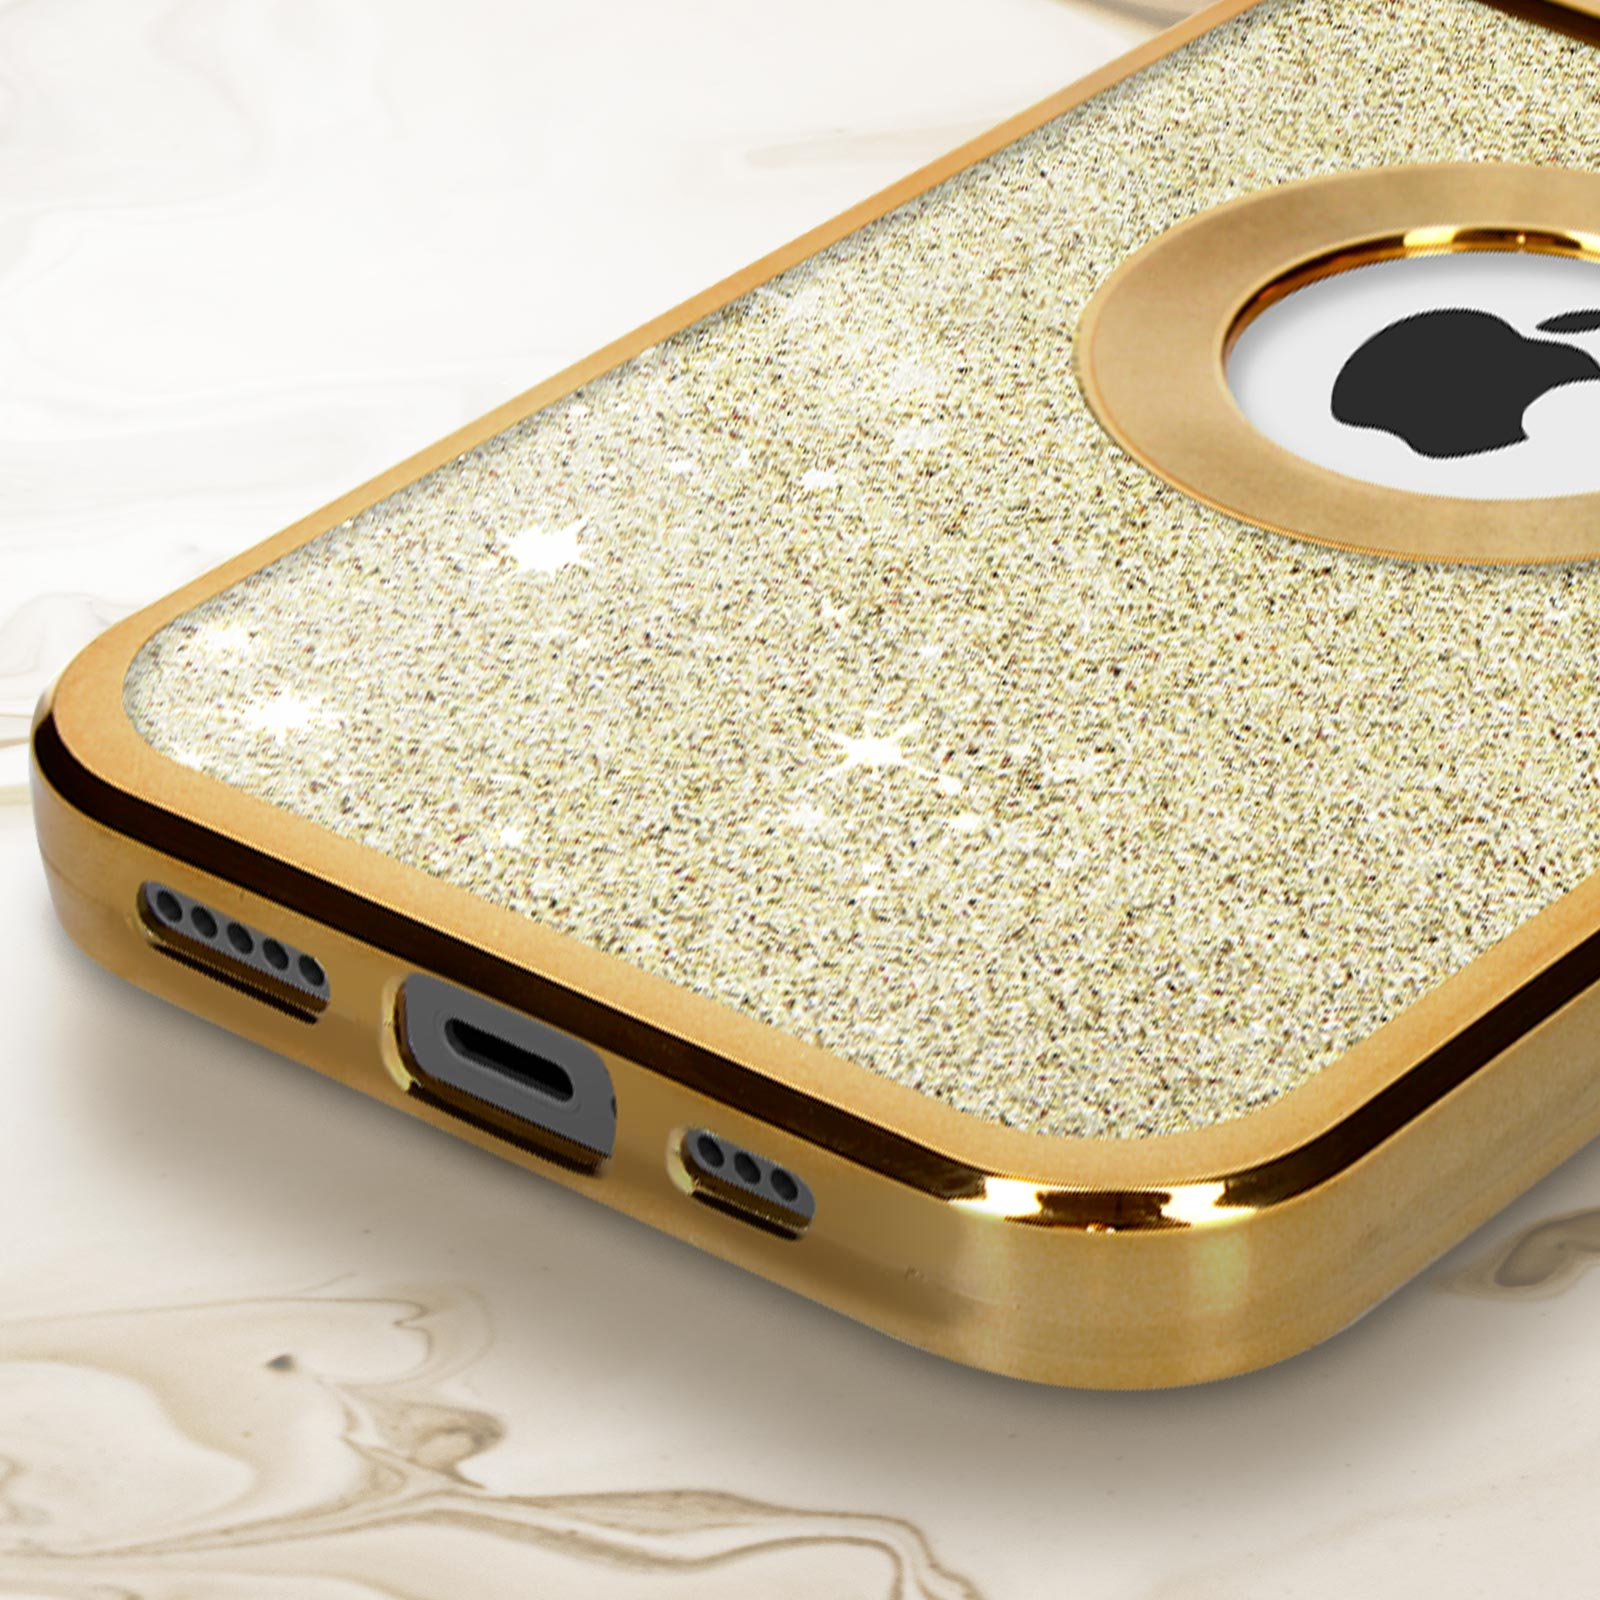 AVIZAR Protecam Spark Series, Backcover, iPhone 12 Gold Pro, Apple